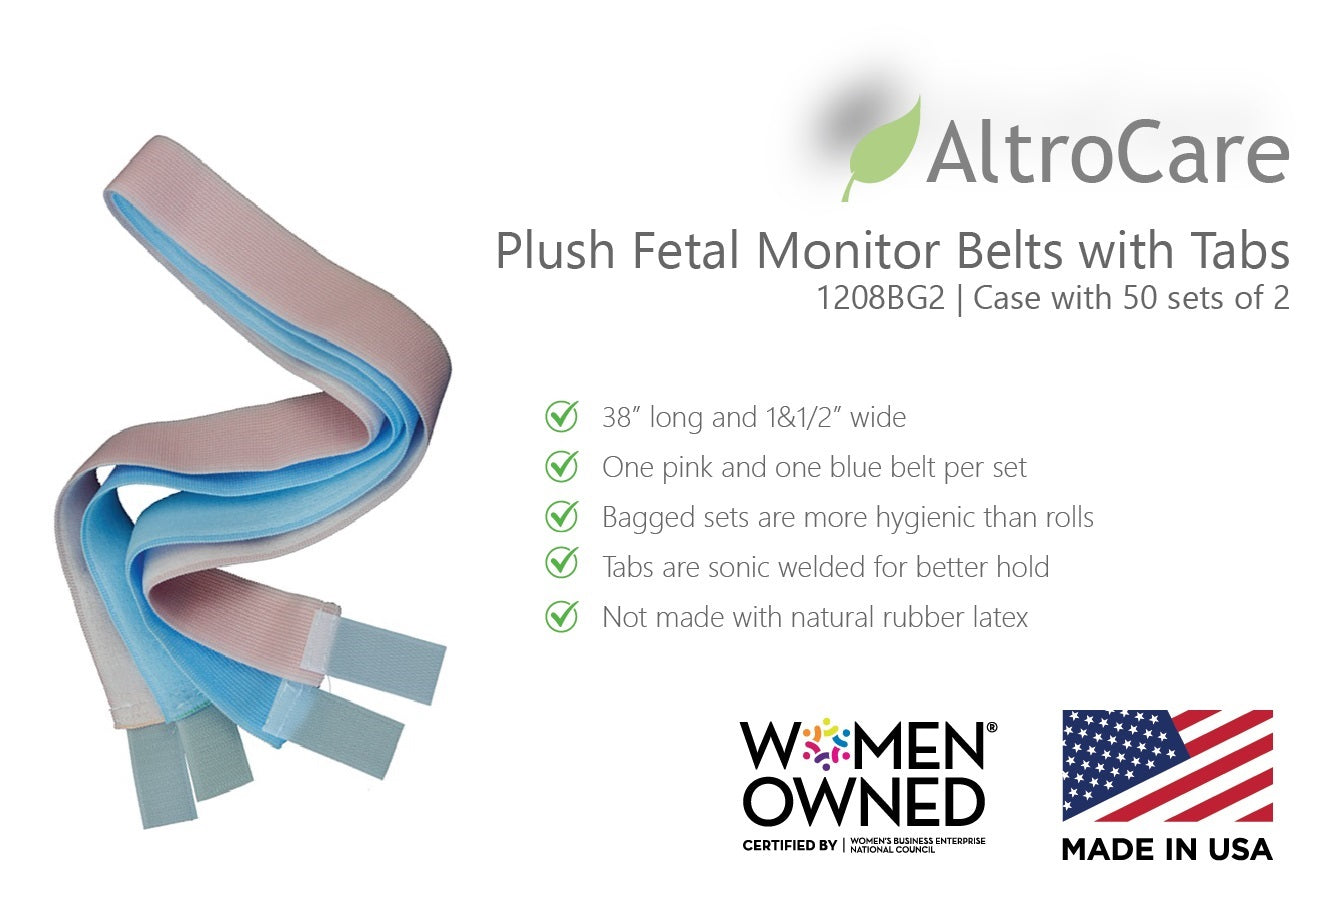 Plush Fetal Monitor Belts with Velcro-like Closure (Case with 50 sets of 2)